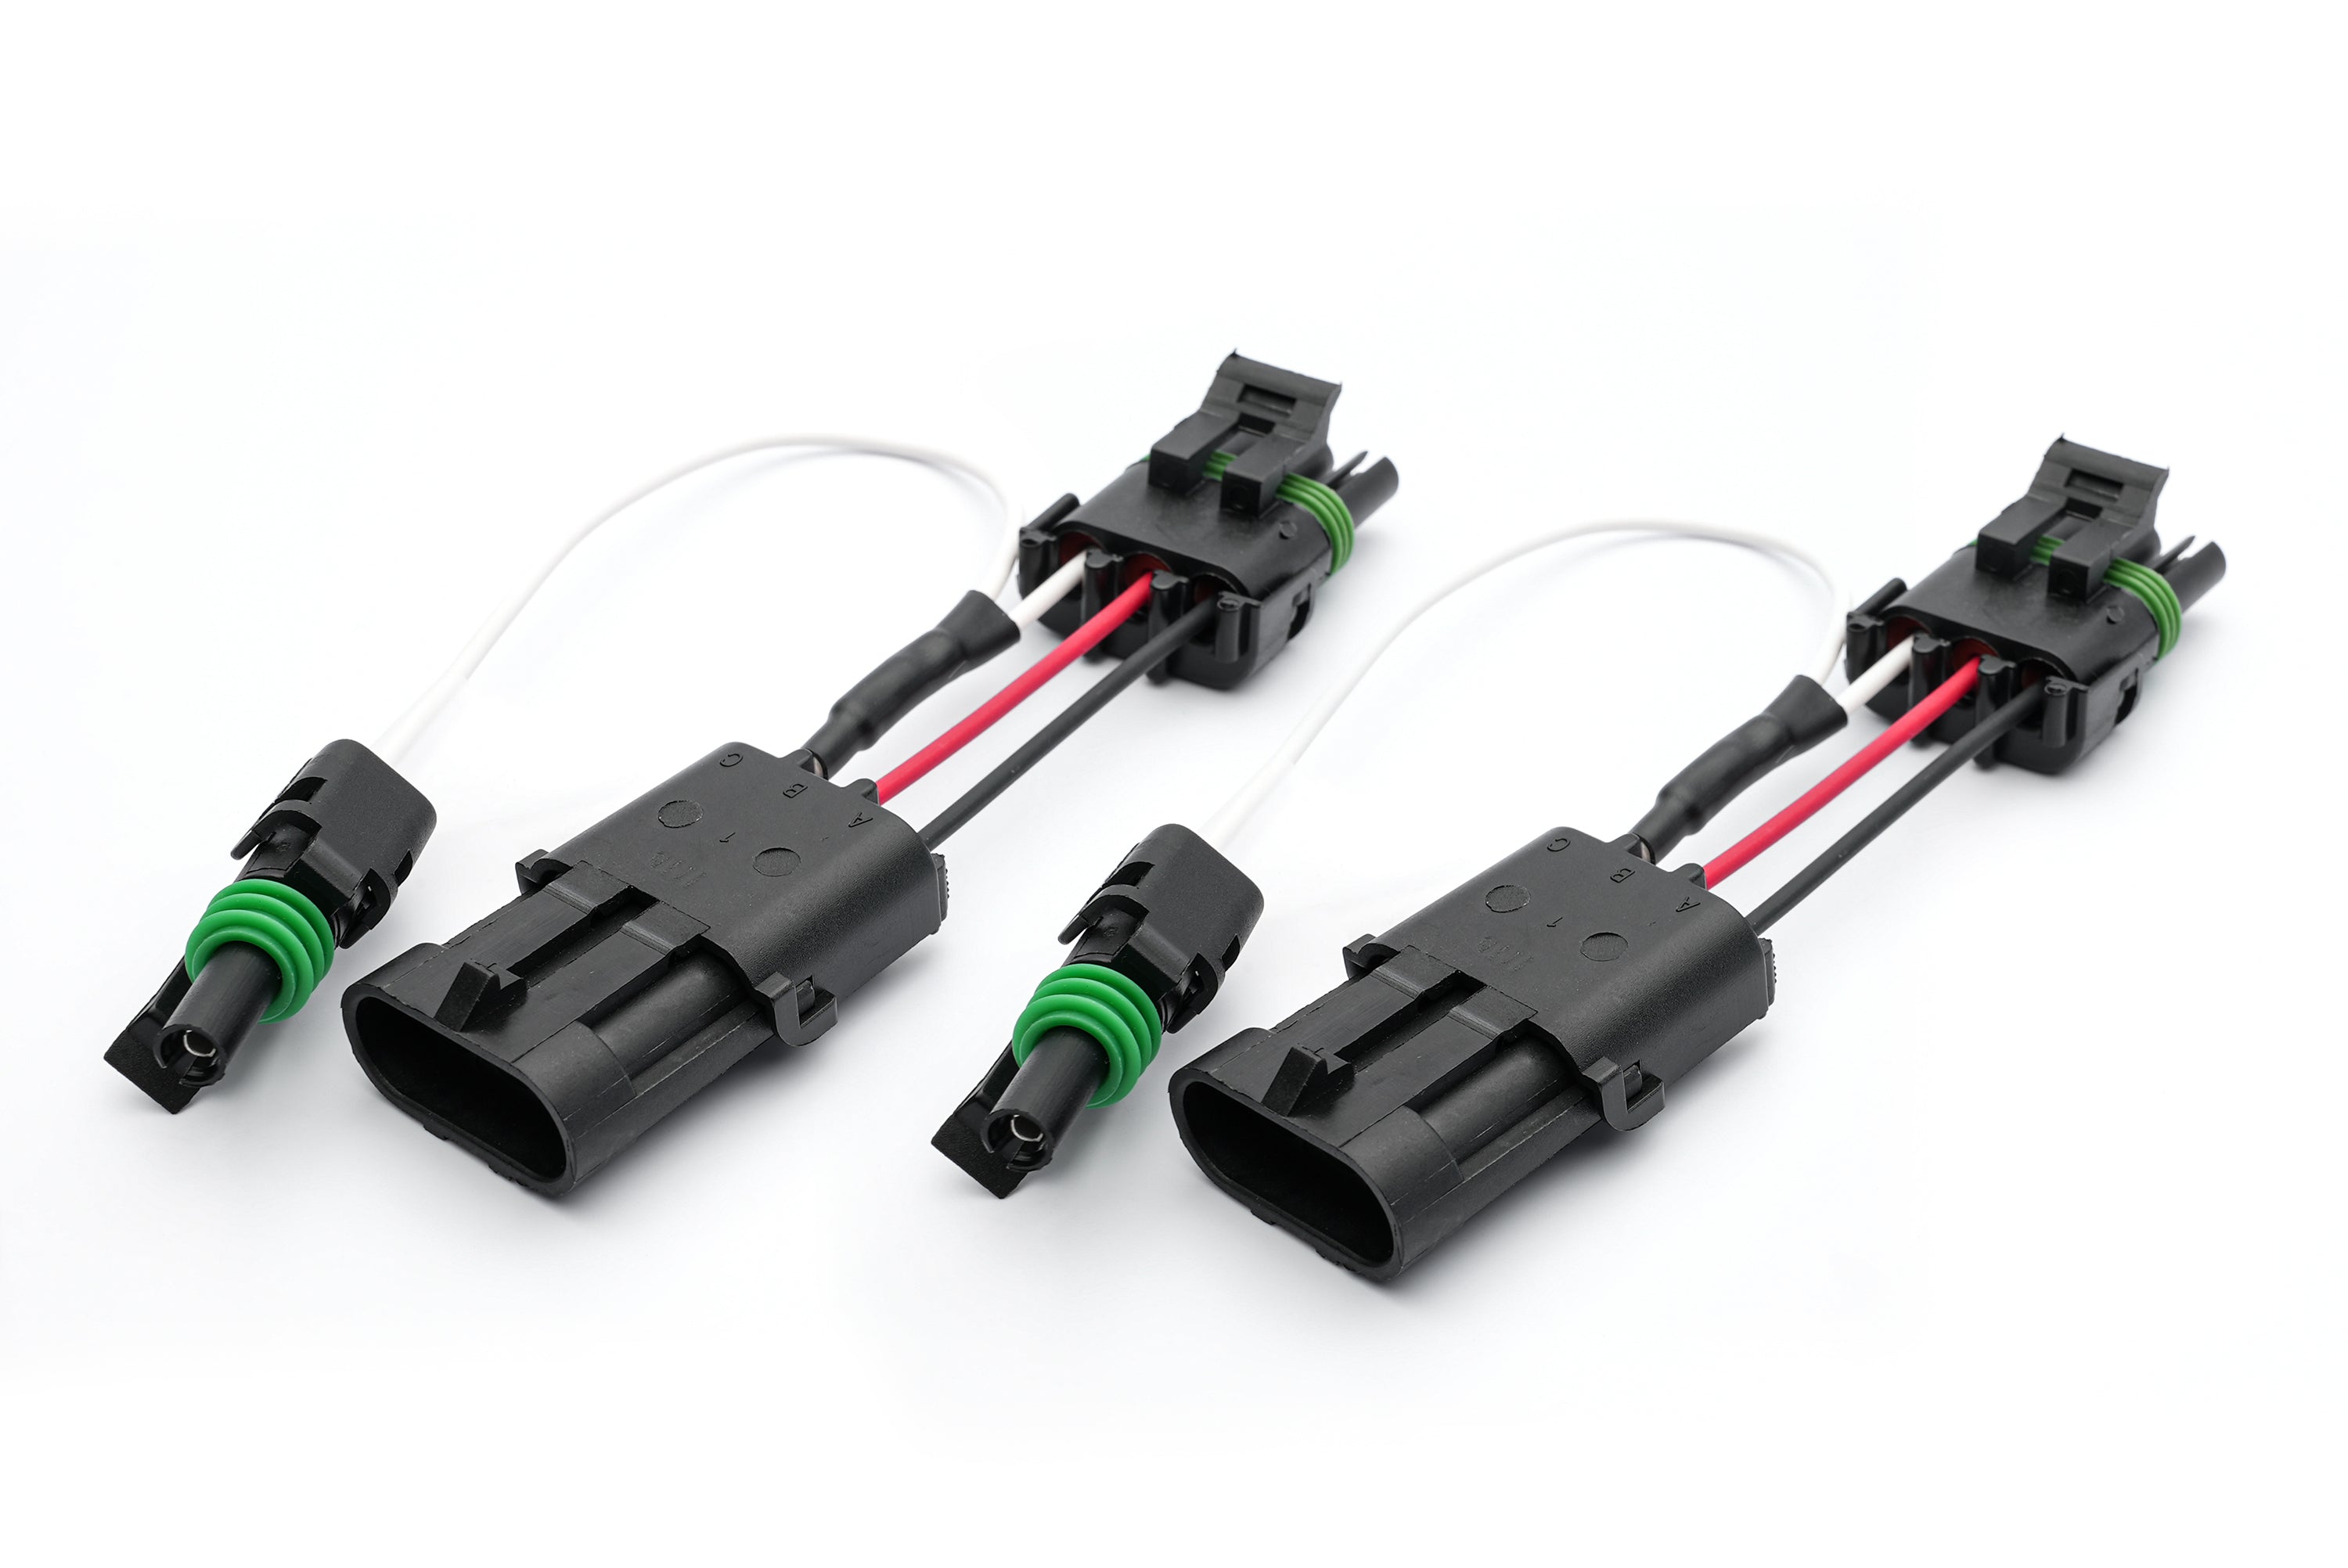 3 Pole to 3 pole WP Connector Adapter with Backlight Port Tap (Pair)